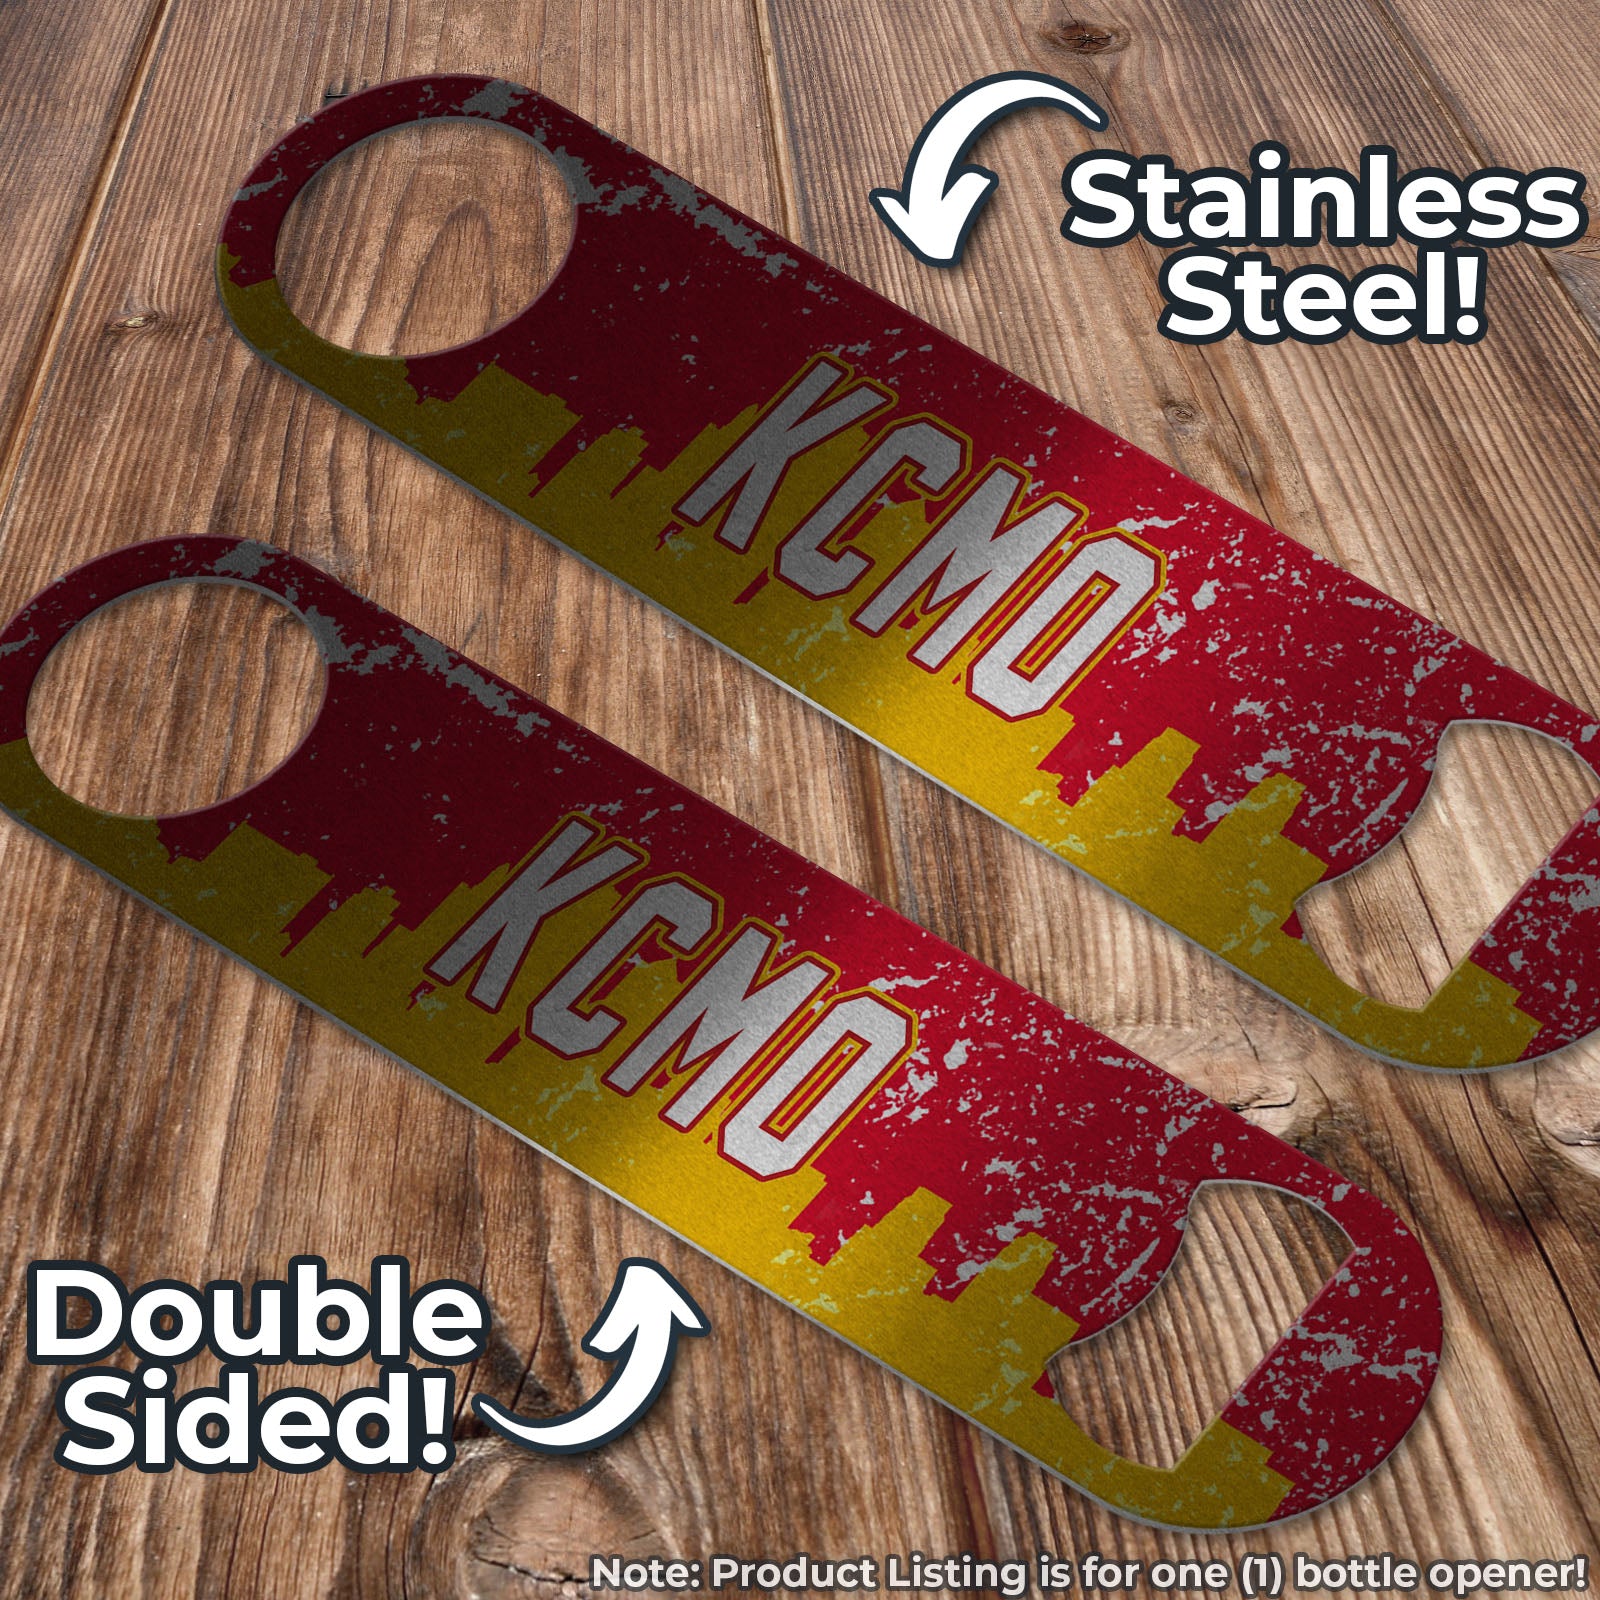 KCMO Distressed Yellow and Red SKYLINE Football Themed Pub Style Stainless Steel Bottle Opener